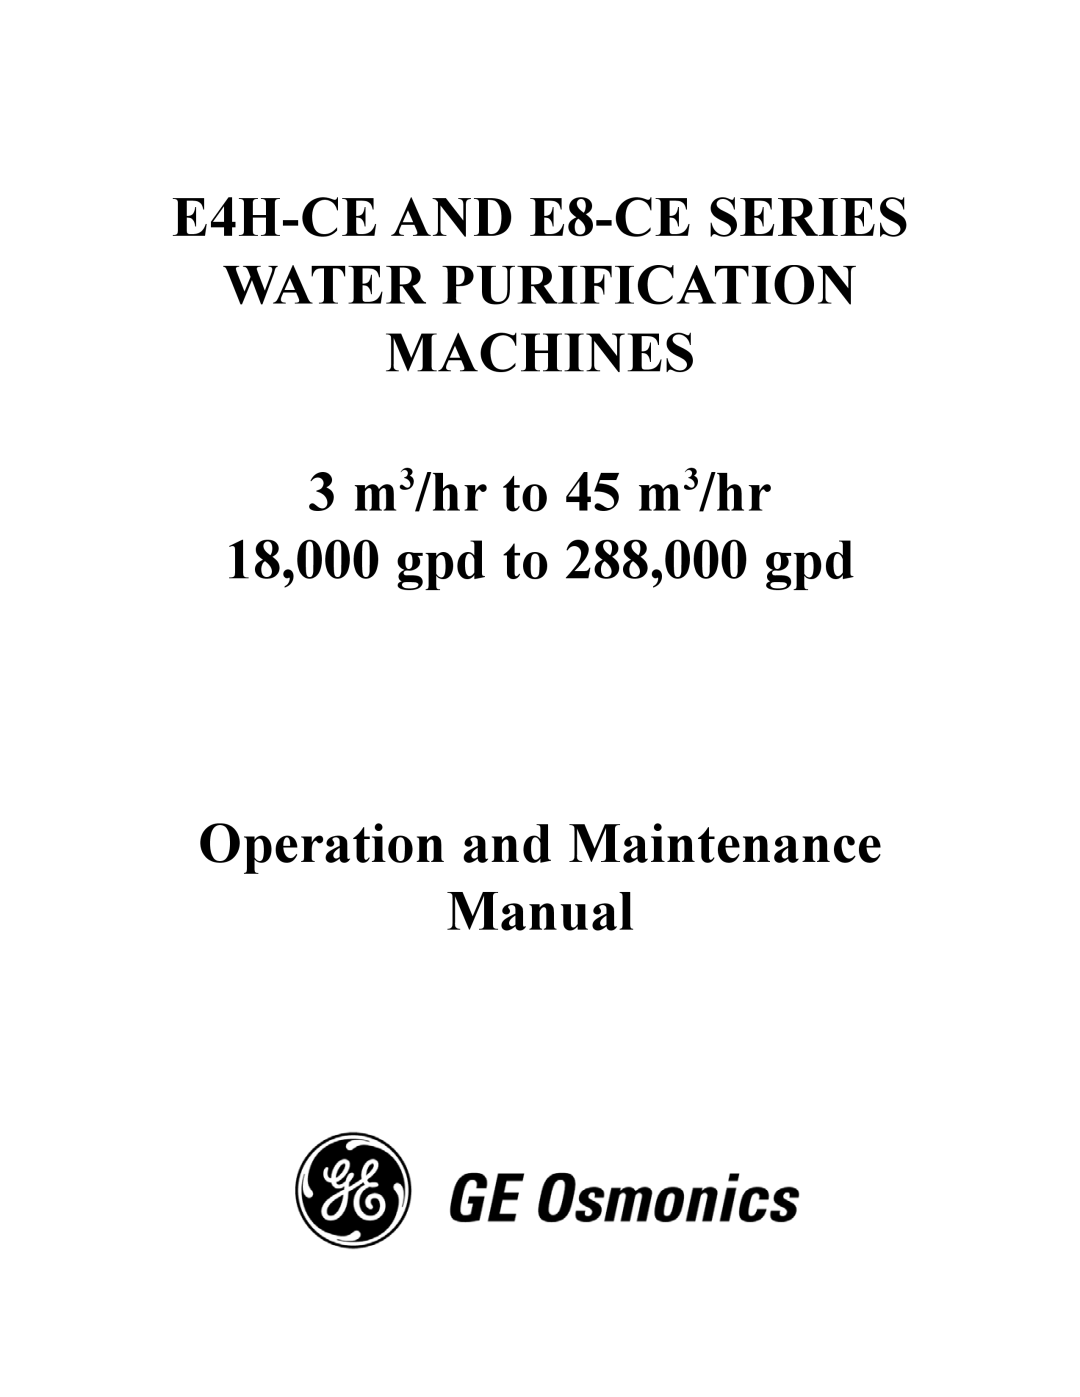 GE manual E4H-CE AND E8-CE SERIES WATER PURIFICATION MACHINES, 3 m3/hr to 45 m3/hr 18,000 gpd to 288,000 gpd 